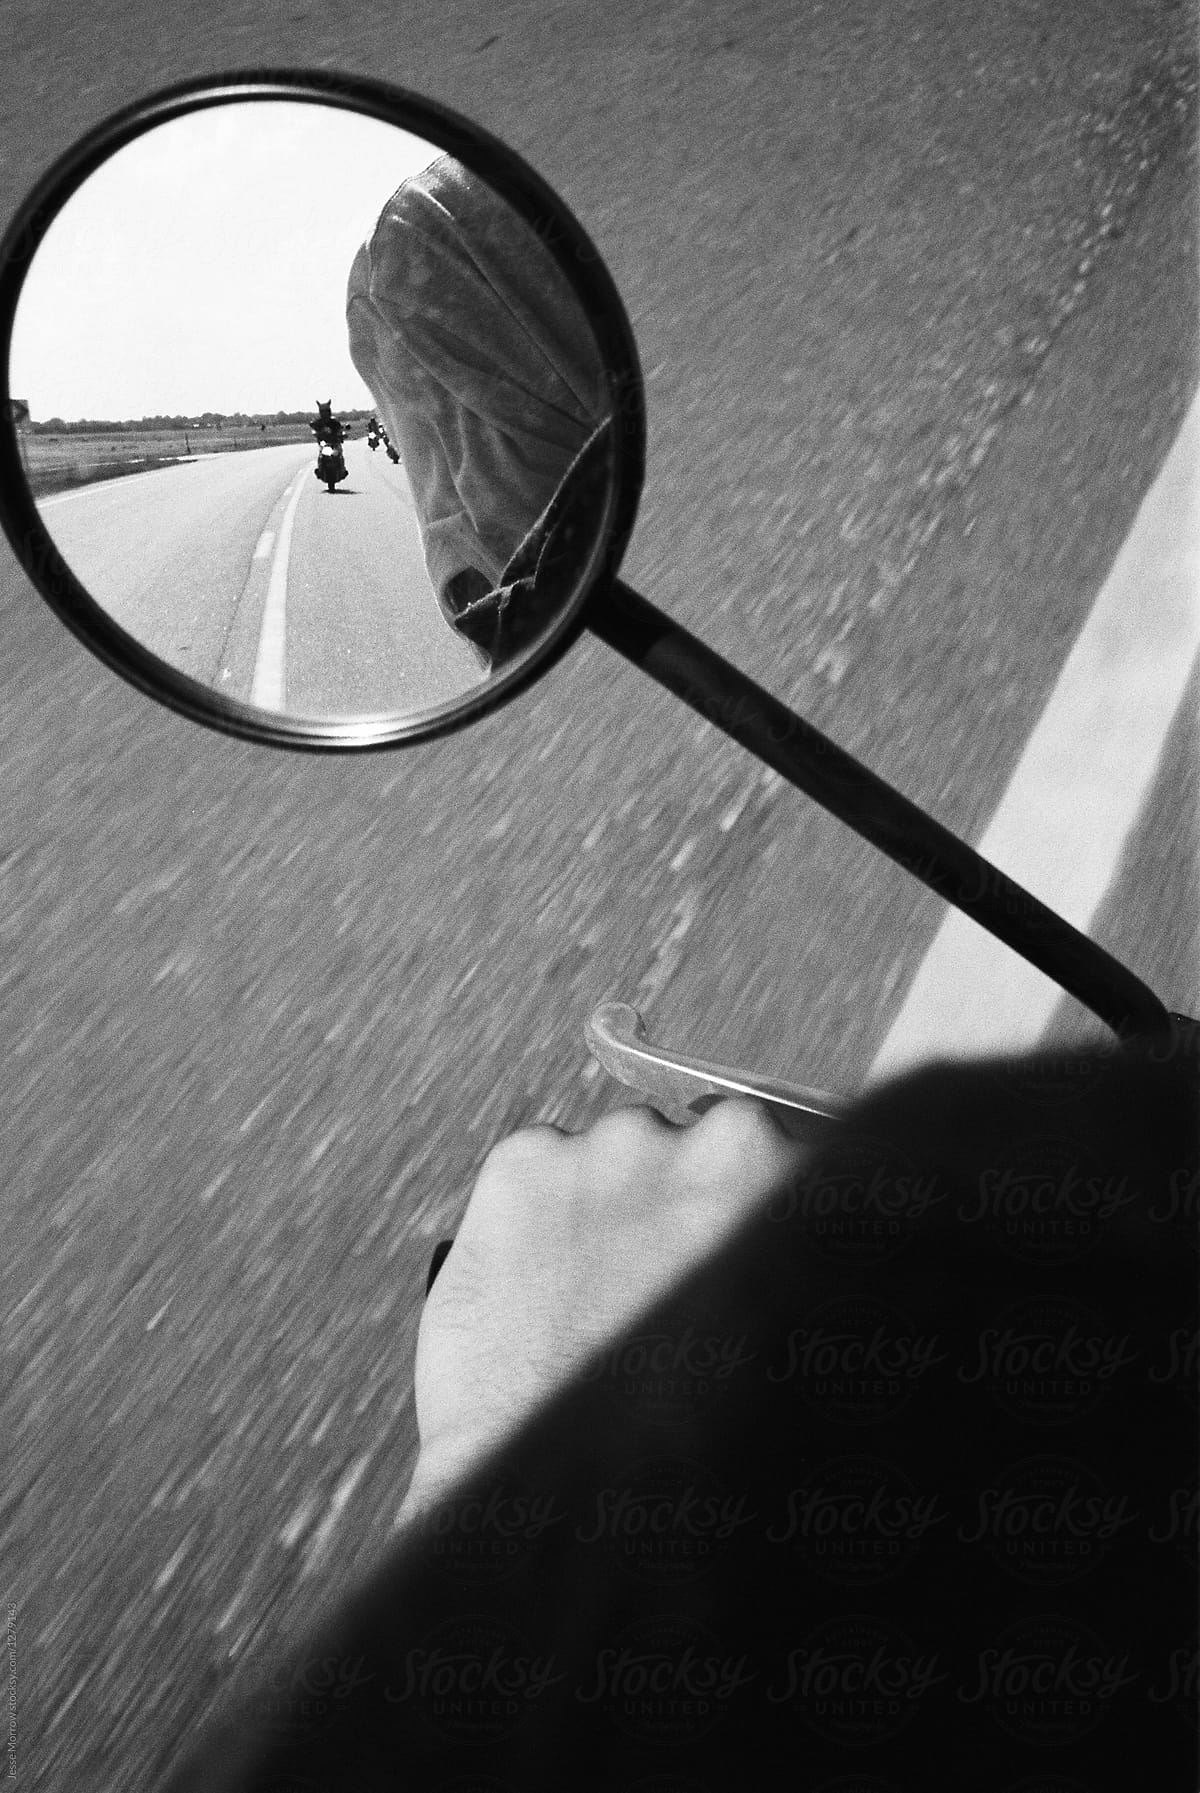 reflection in mirror while riding motorcycle